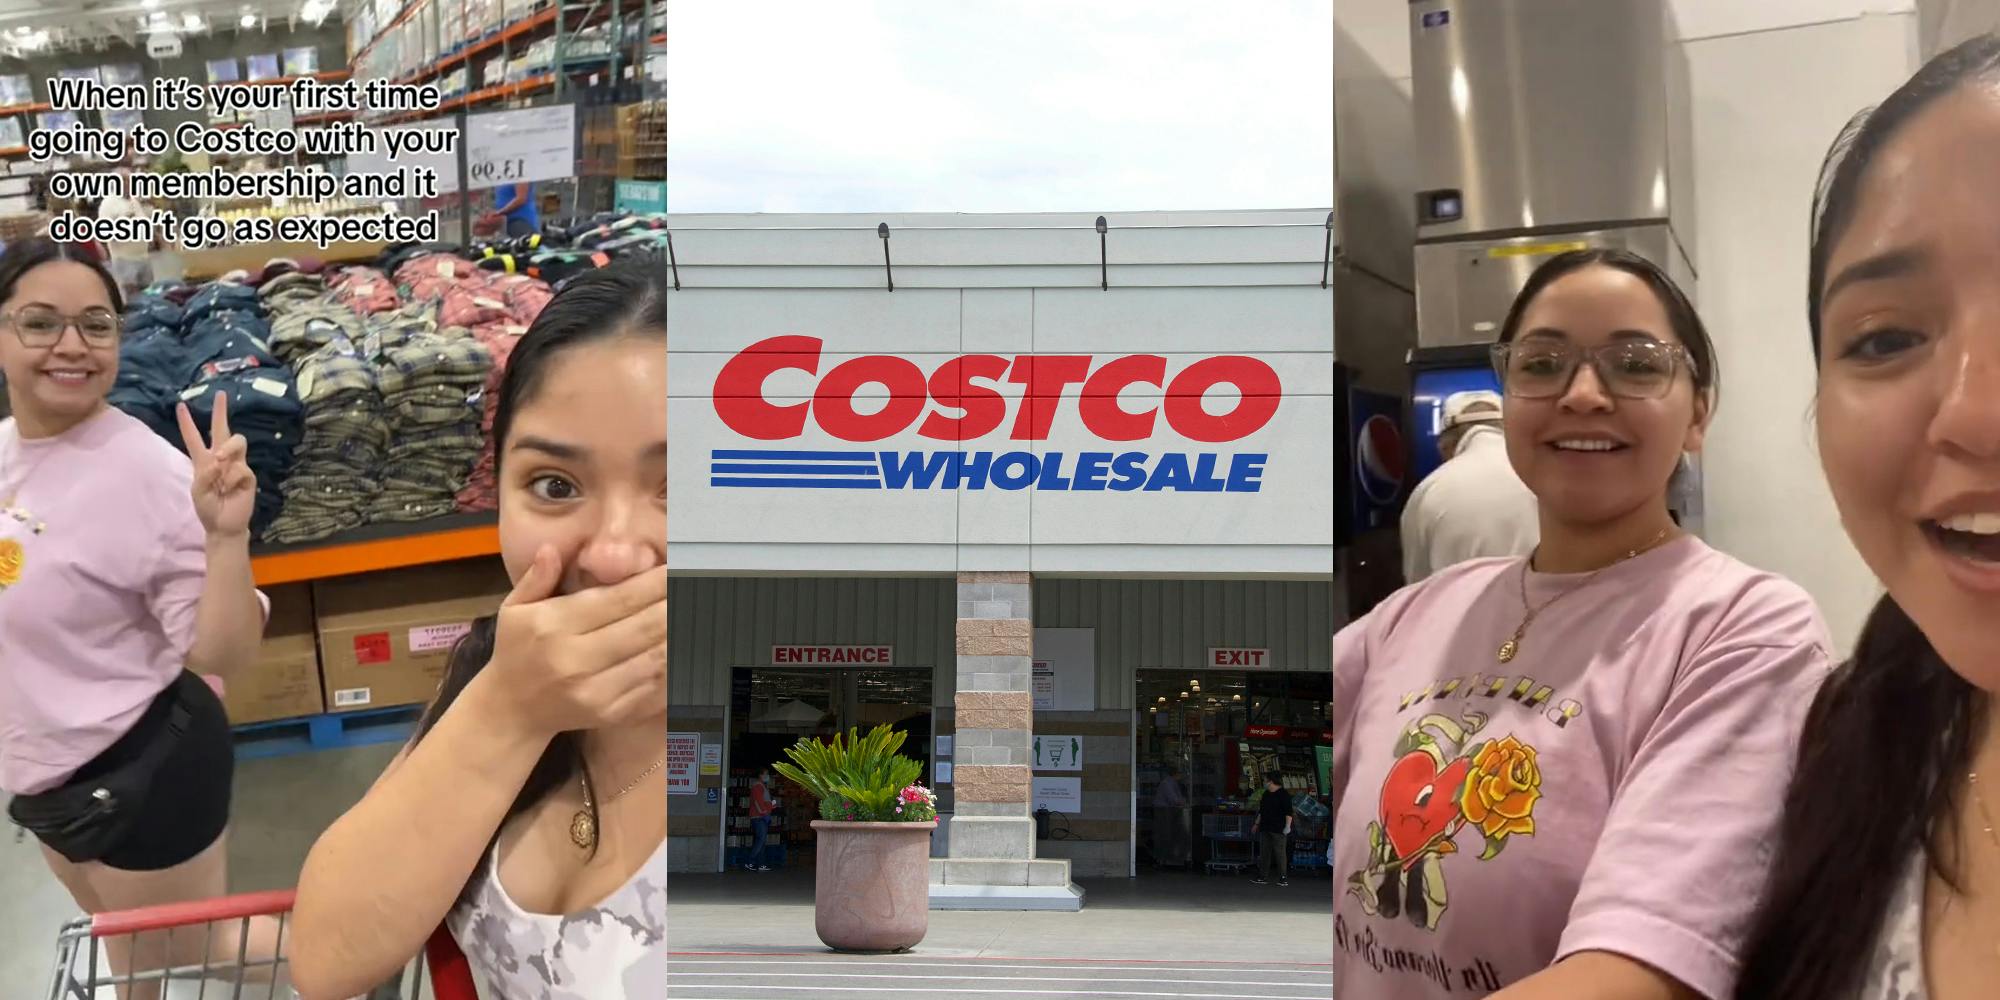 Costco customers with caption "When it's your first time going to Costco with your own membership and it doesn't go as expected" (l) Costco building with sign (c) Costco customers speaking (r)